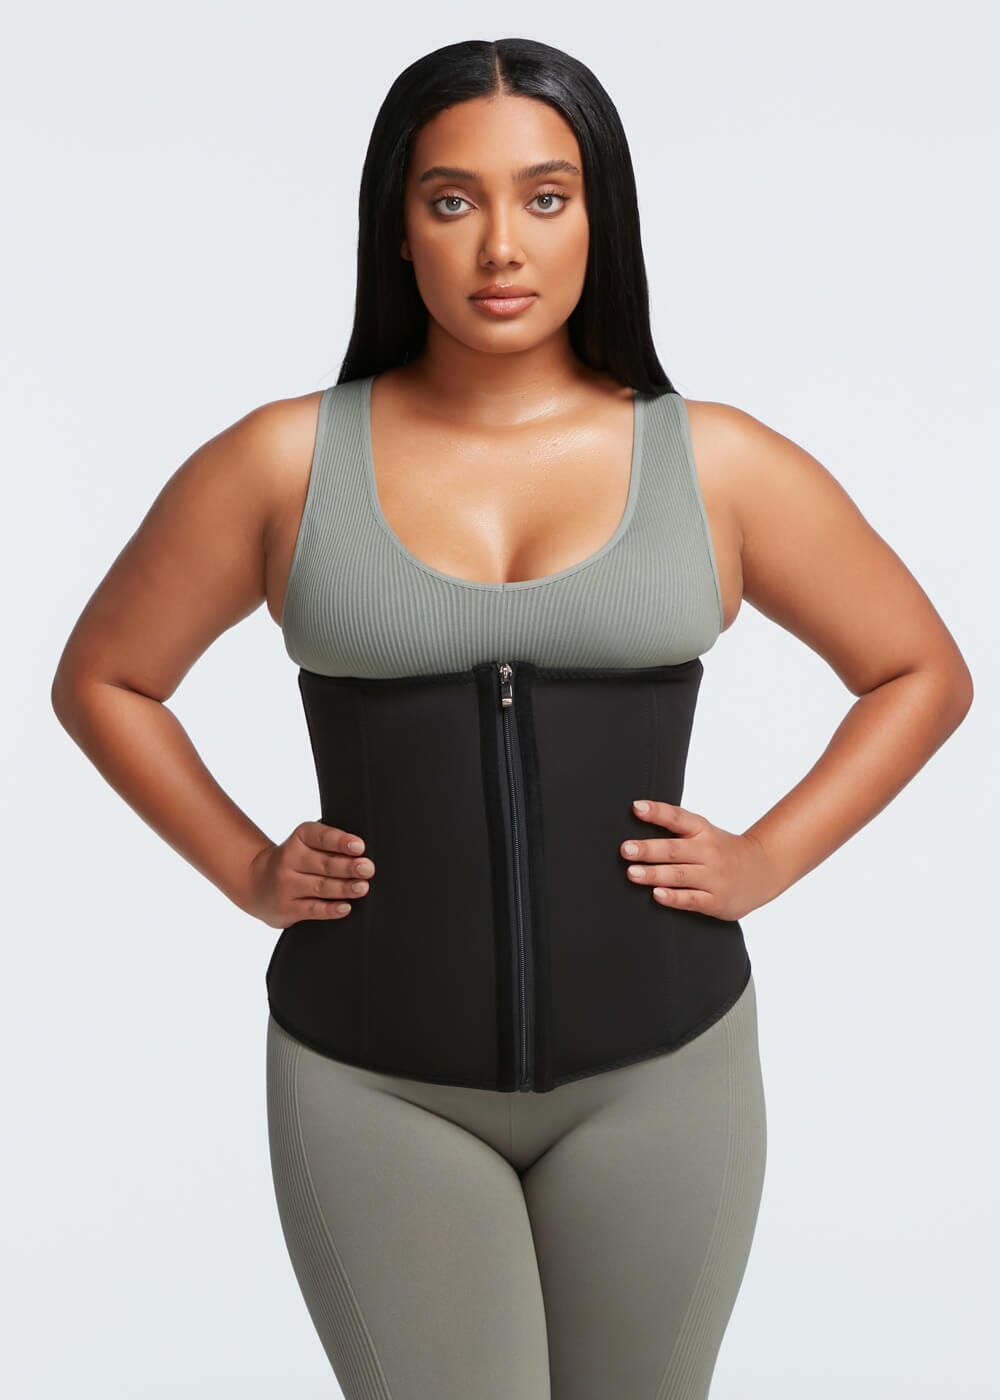 Plus Size Sauna Waist Trainer Outlet Here